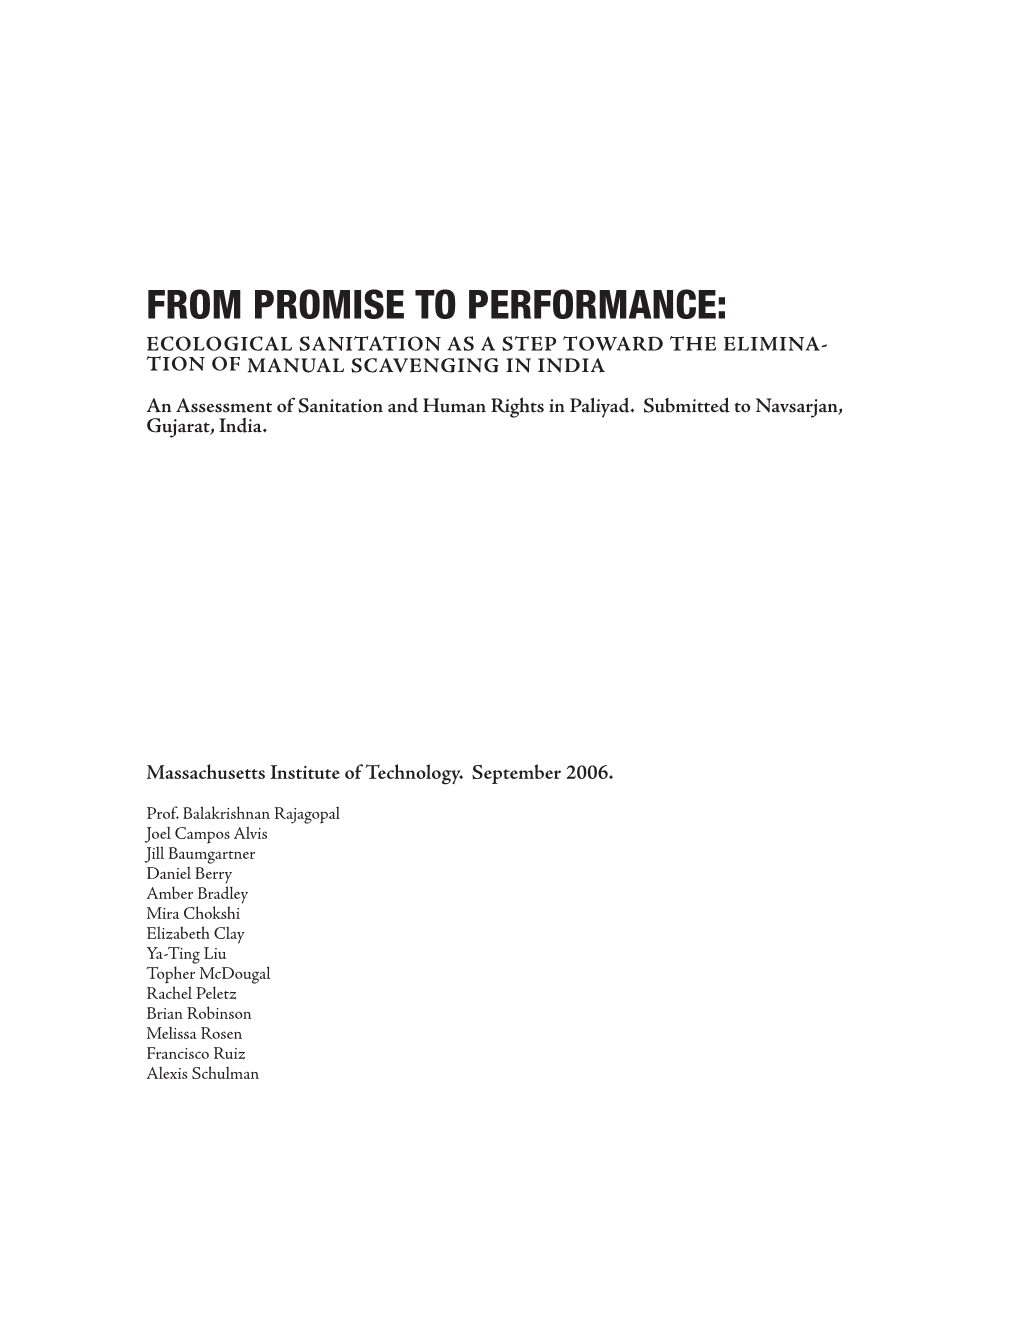 From Promise to Performance